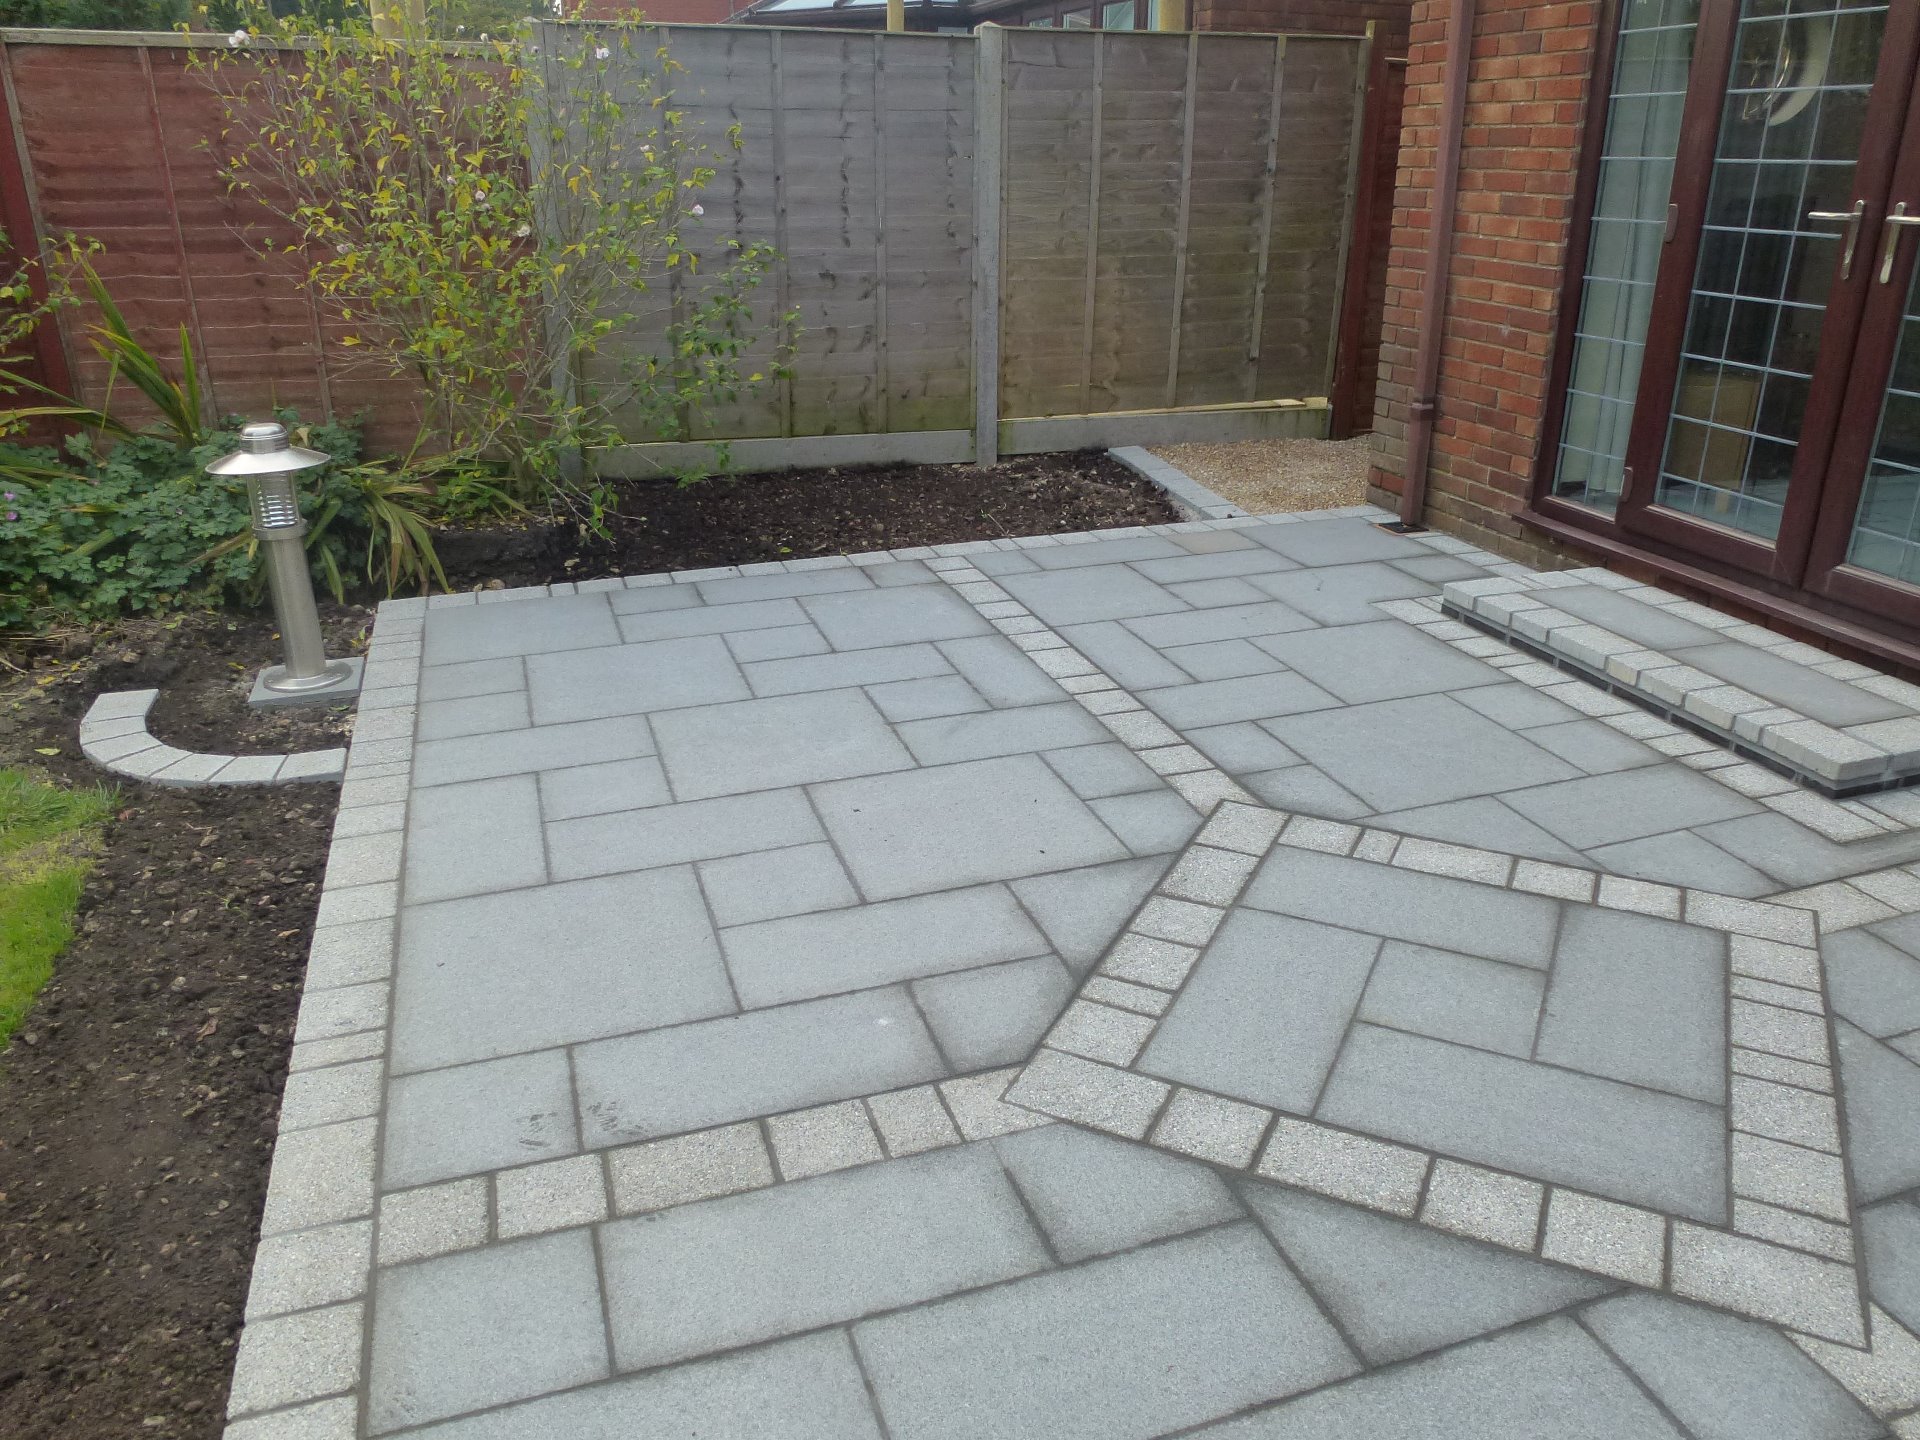 A new patio built with Chinese Granite paving slabs and Argent light paviours to add detail